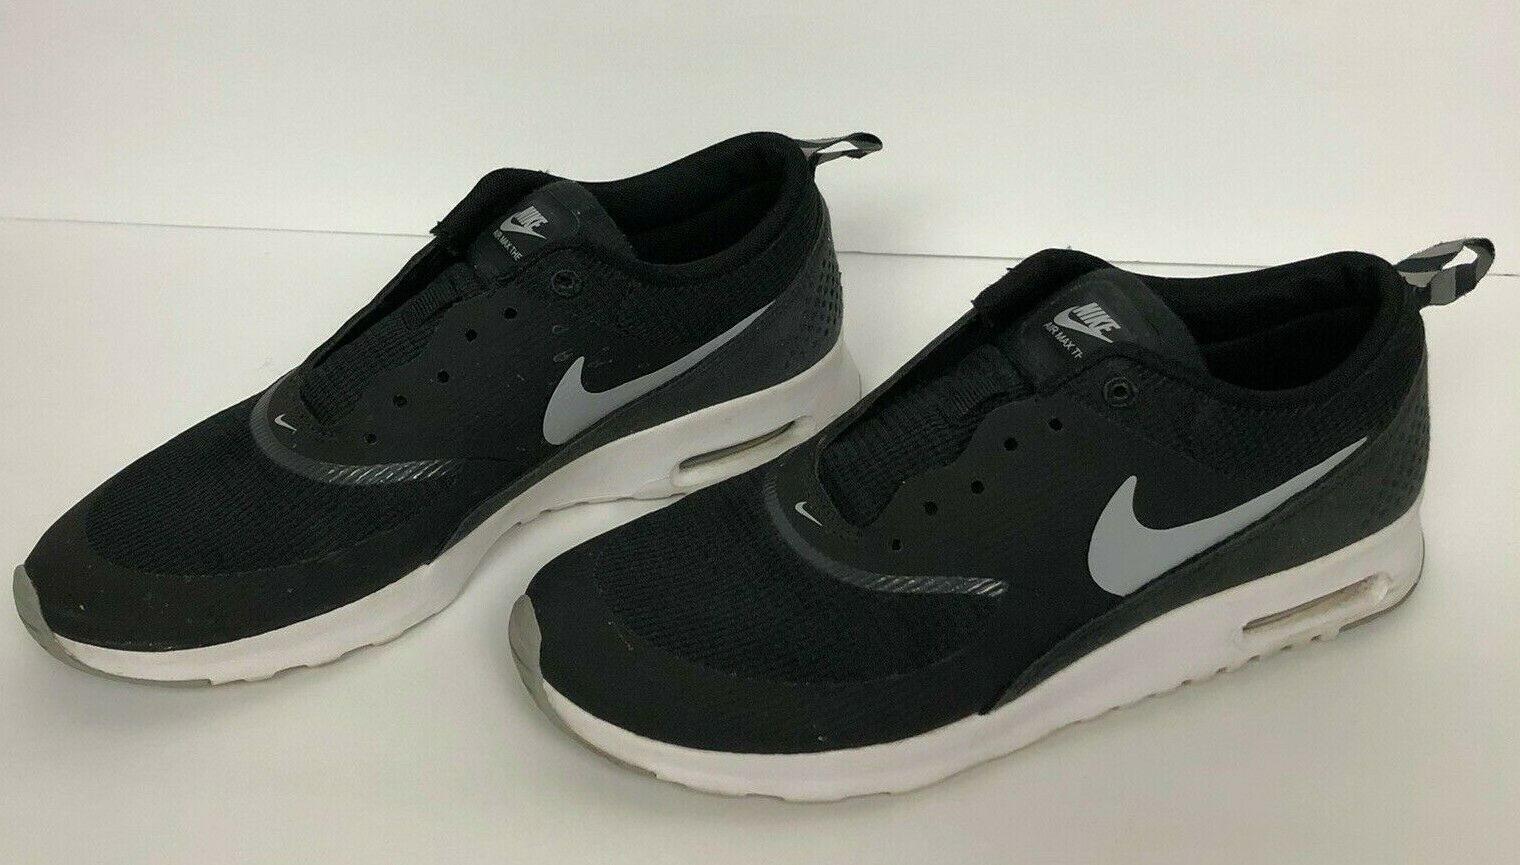 Nike Air Thea Sneakers Black White Running Shoes No Laces 599409-007 US 8.5